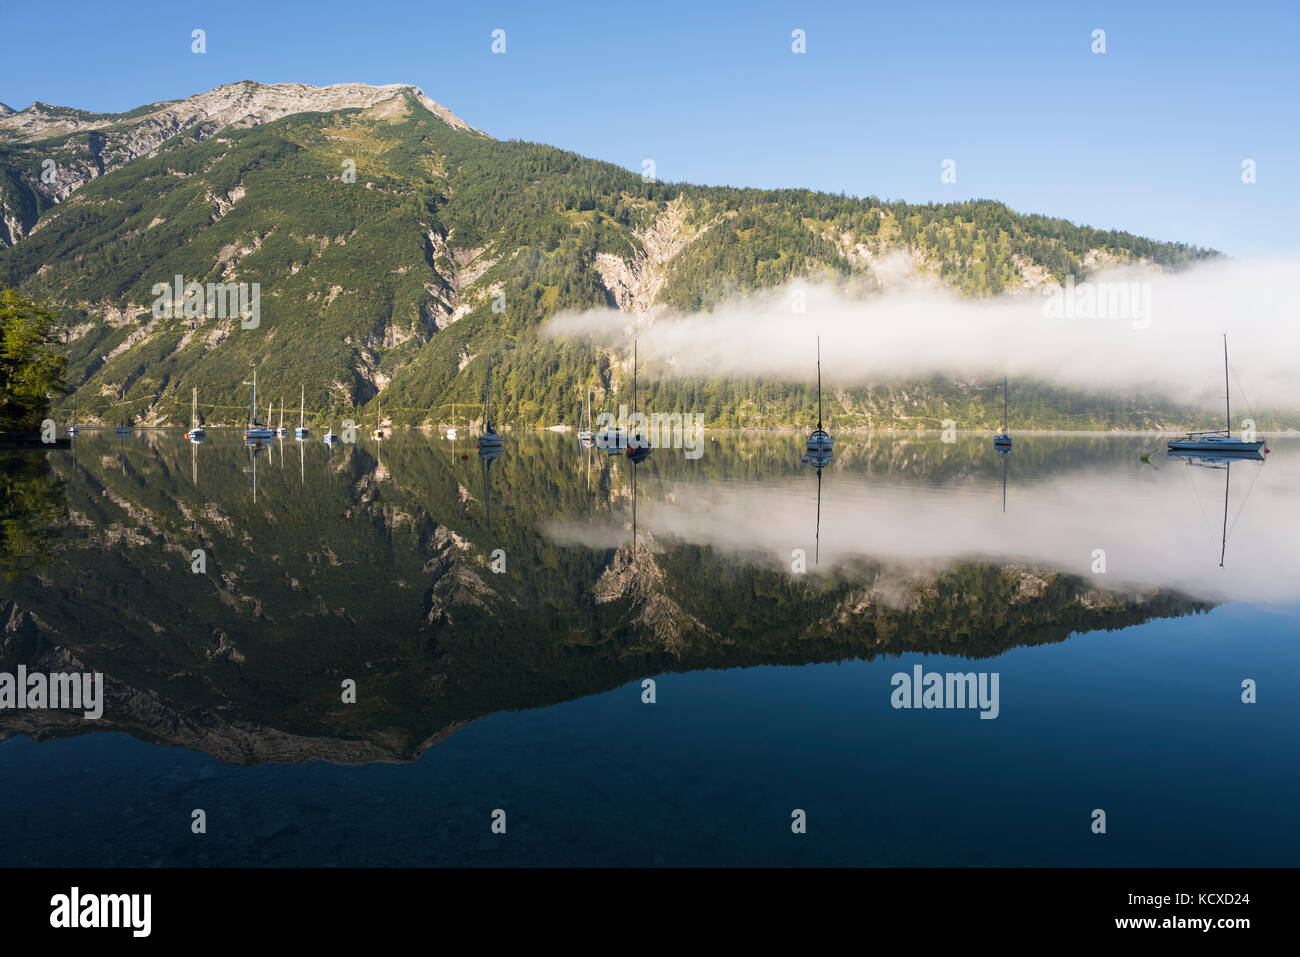 Mount Seekarspitze, sailing boats and yachts in the morning sun reflected in the calm surface of the Lake Achensee in autumn, Tyrol, Austria Stock Photo